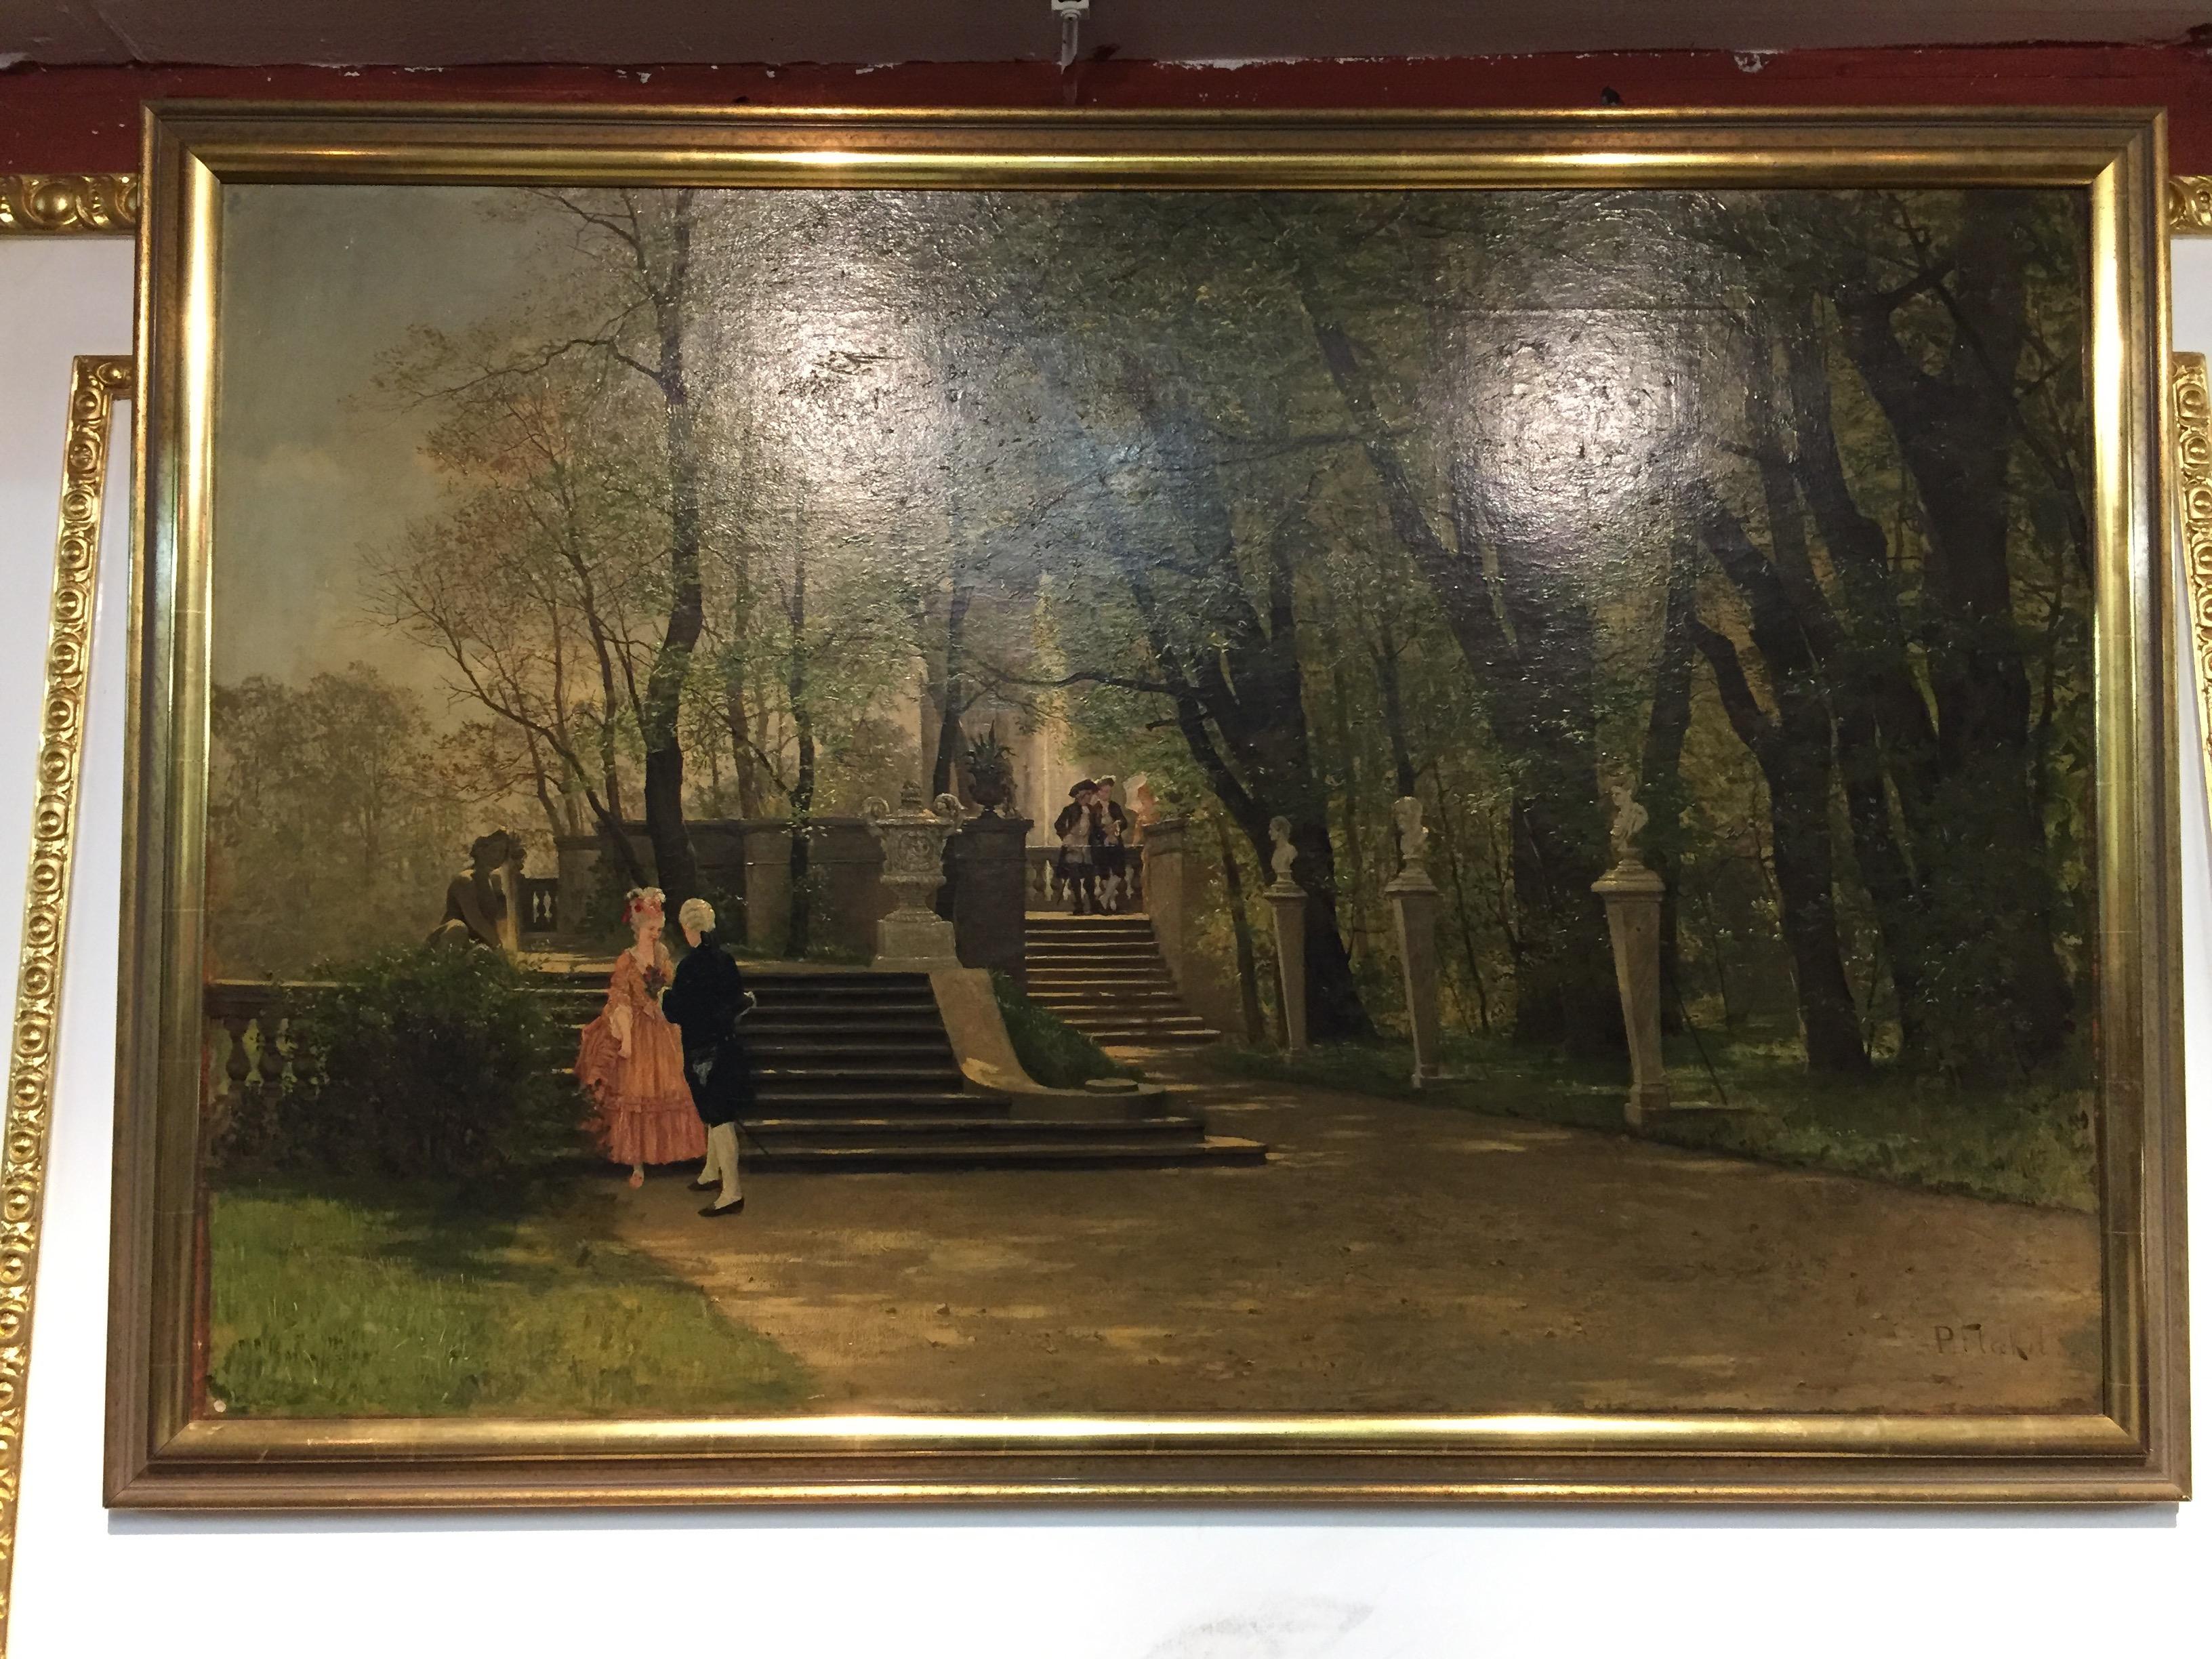 Oil Painting by P. F. Flickel in the Castle Garden 1